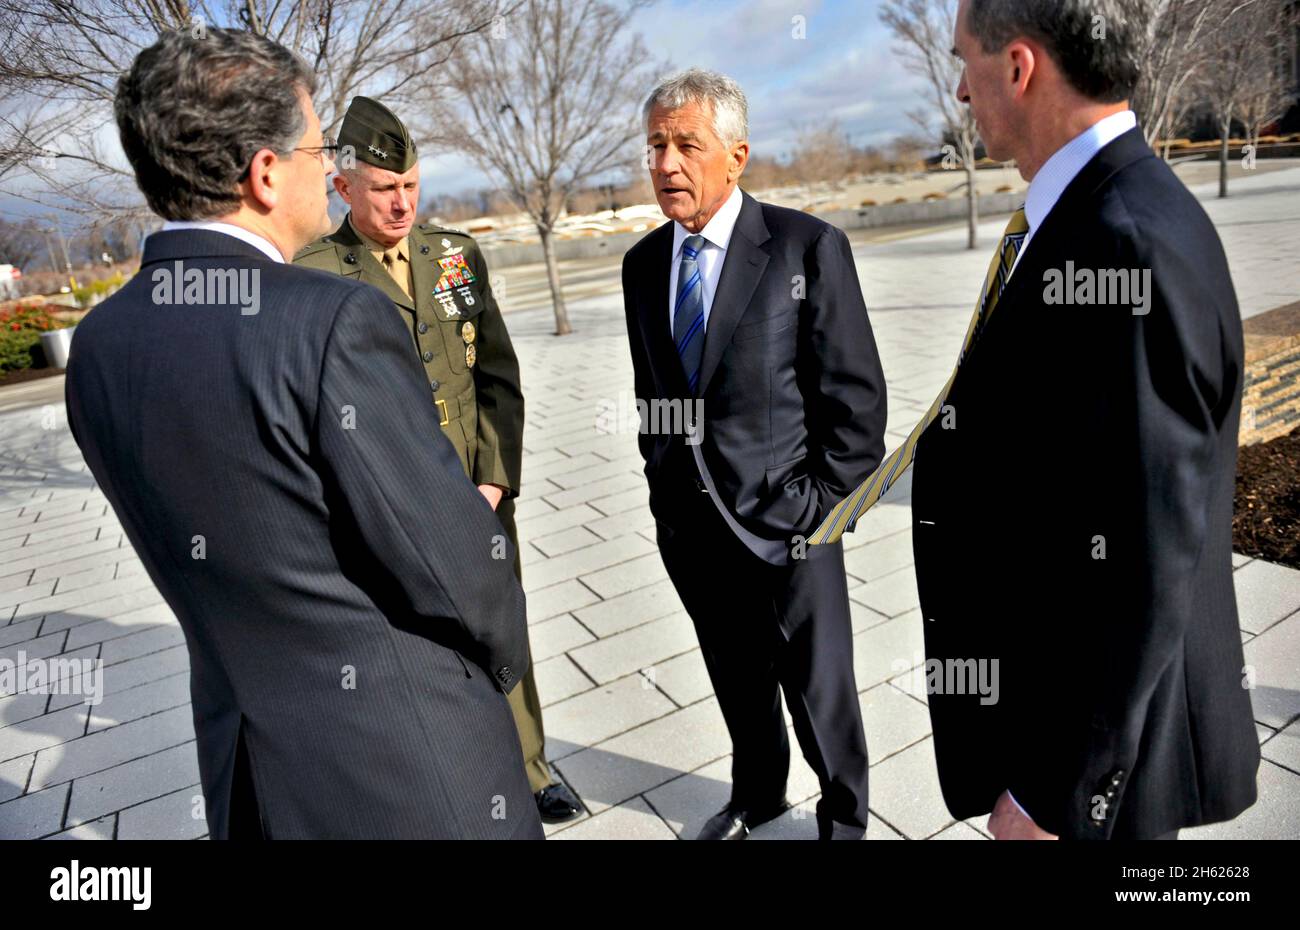 Newly sworn in 24th Secretary of Defense Chuck Hagel is given a tour of the Pentagon 9-11 Memorial by Michael L. Rhodes, left, along with SMA Lt. Gen. Thomas Waldhauser and Marcel Lettre Feb. 27, 2013. Stock Photo